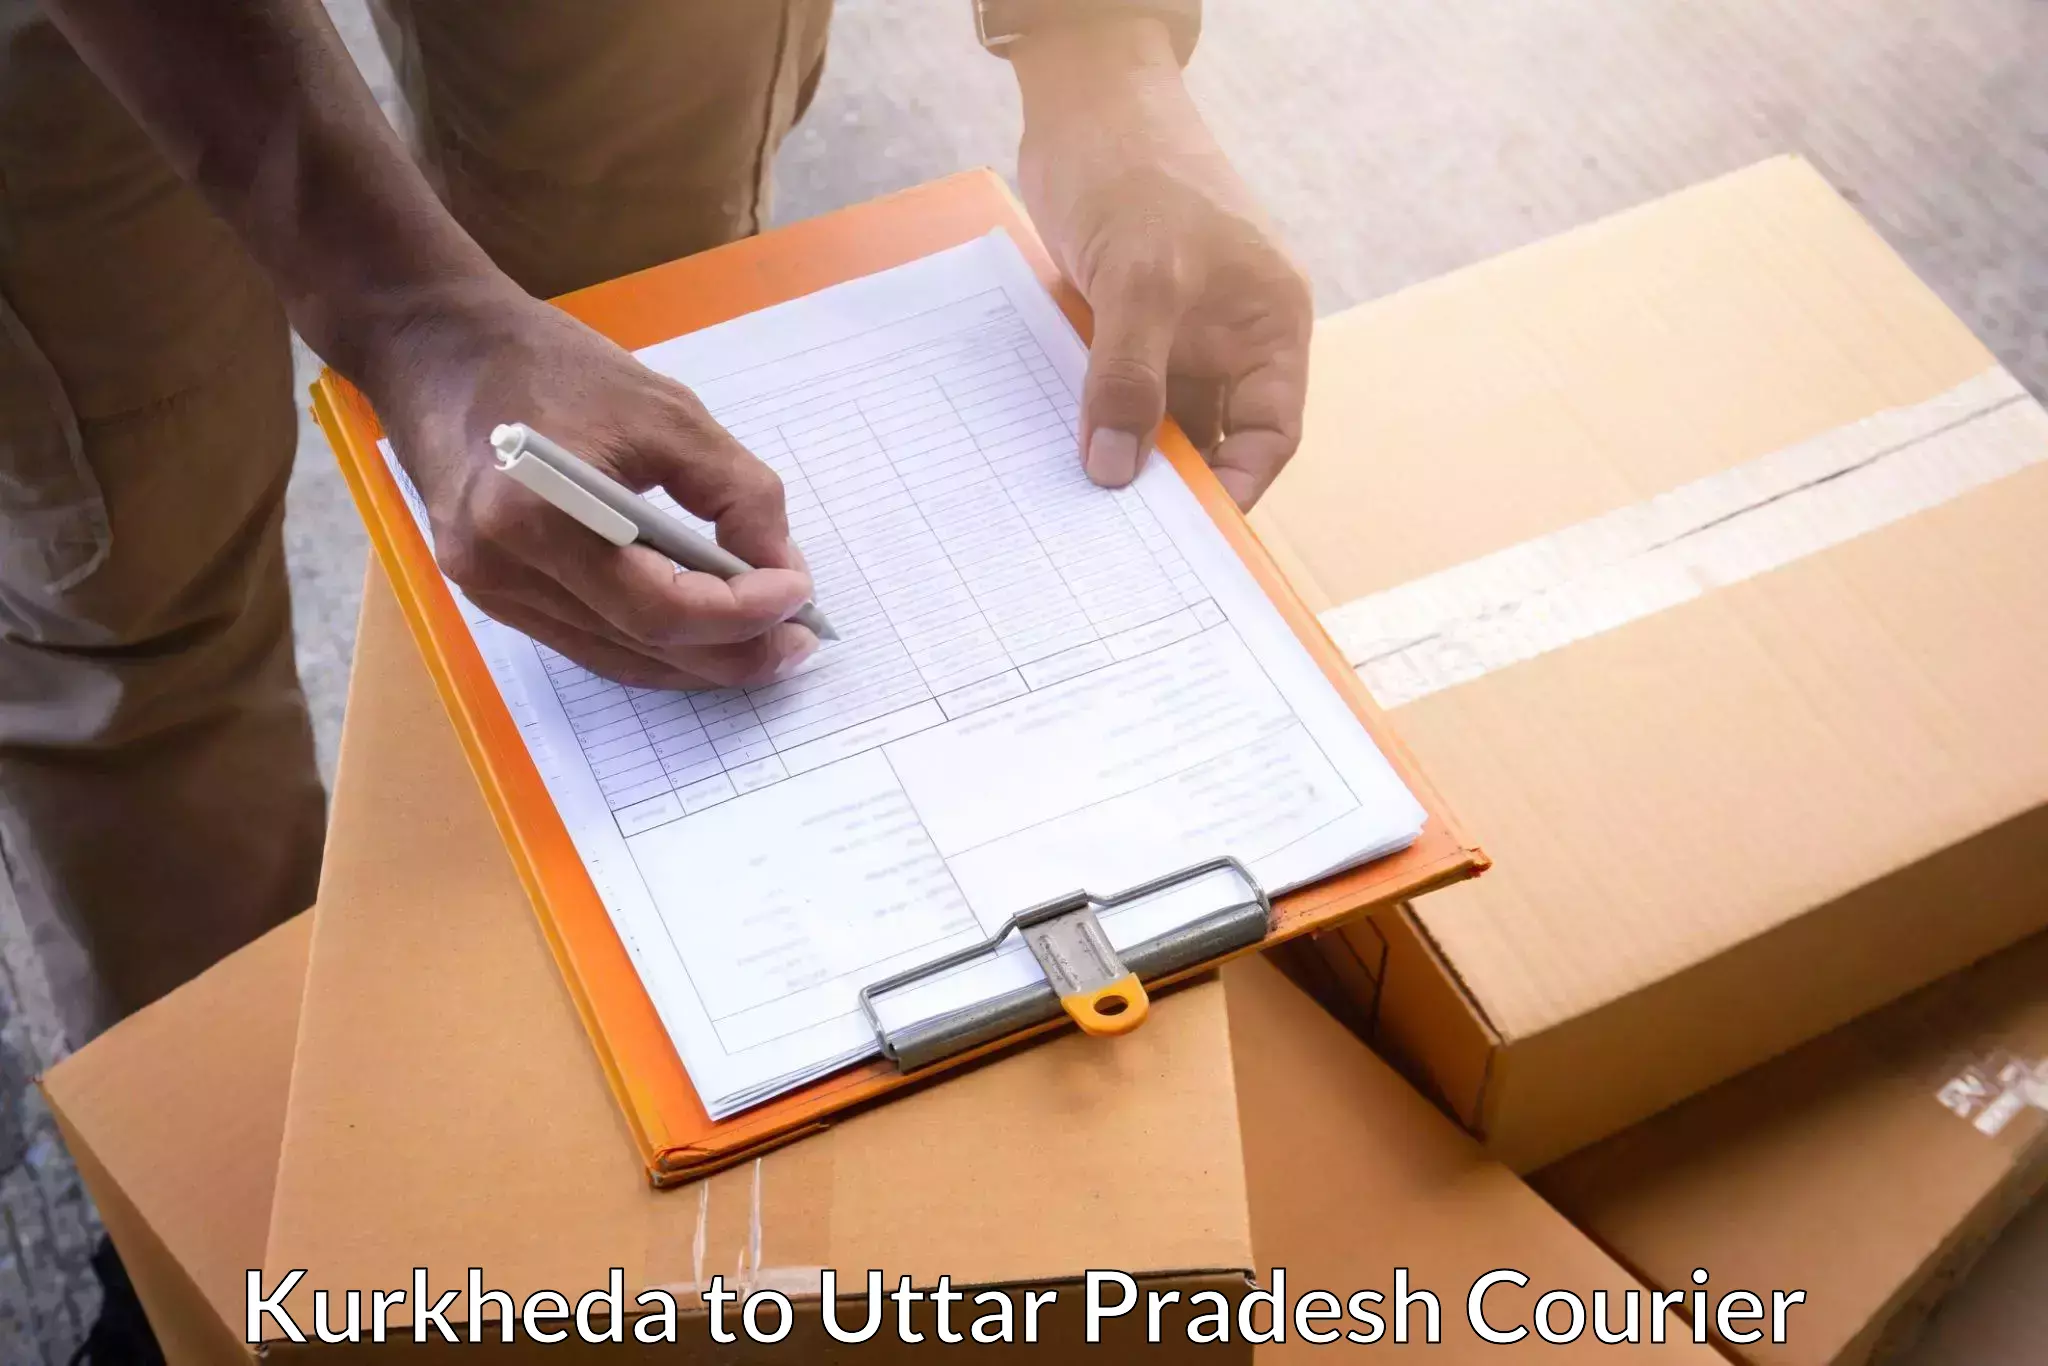 State-of-the-art courier technology Kurkheda to Ghazipur